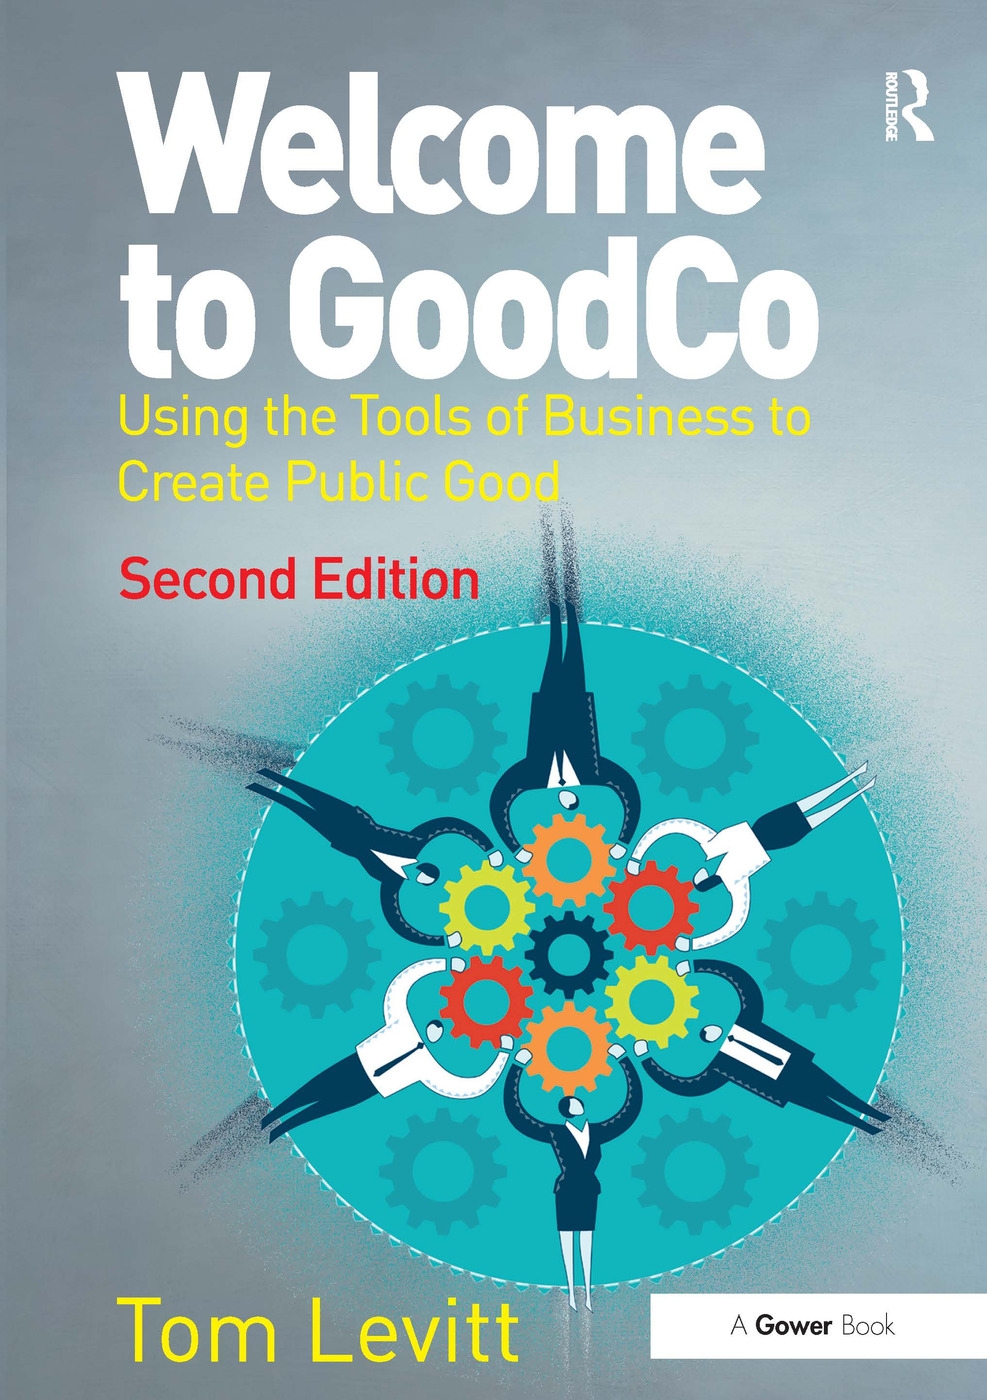 Welcome to Goodco: Using the Tools of Business to Create Public Good